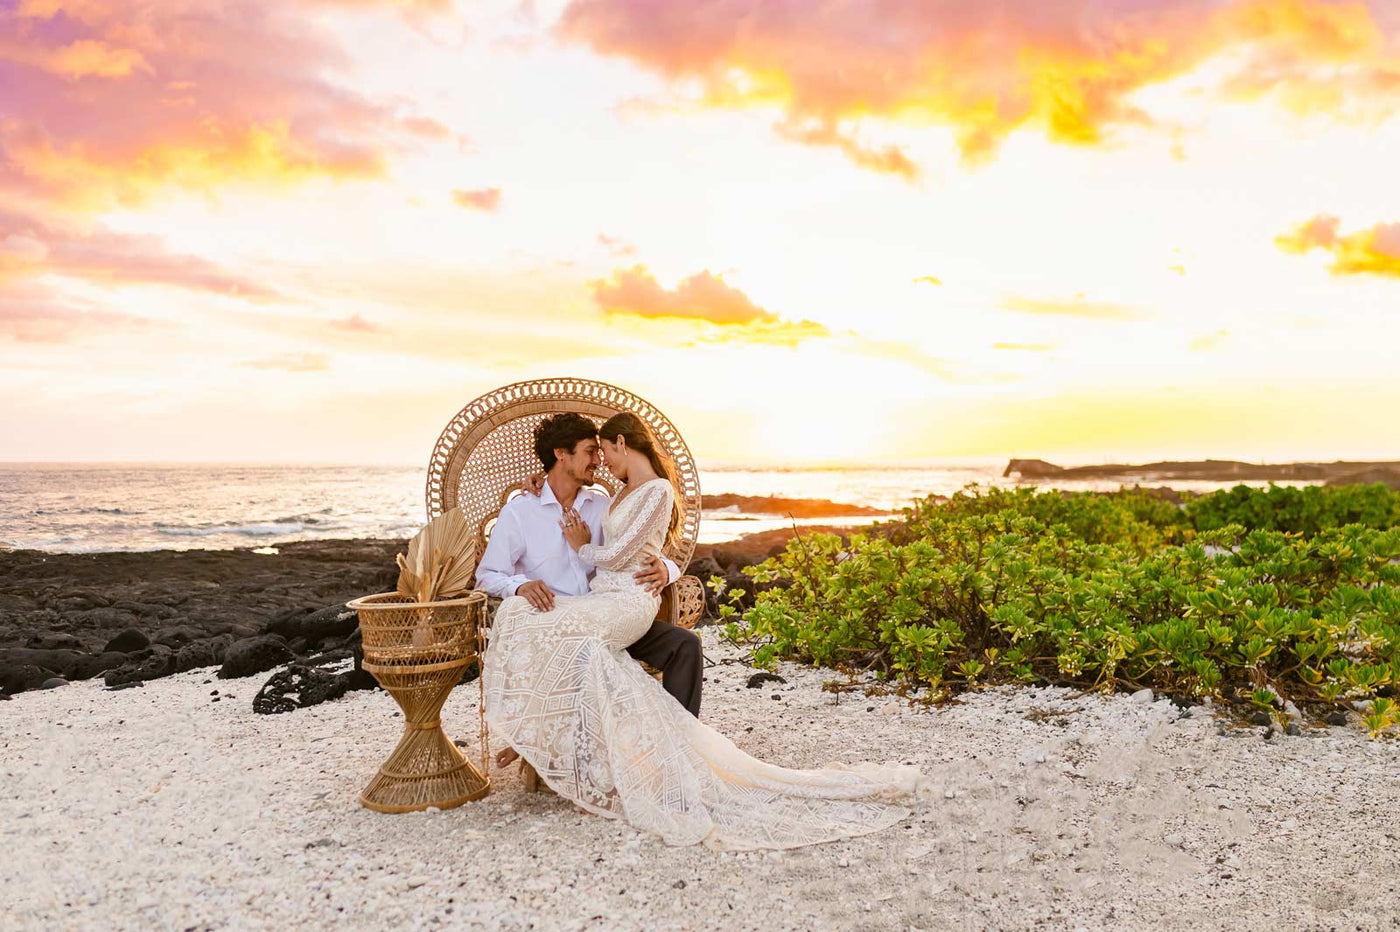 Ten things to consider when planning an outdoor wedding in Hawaii